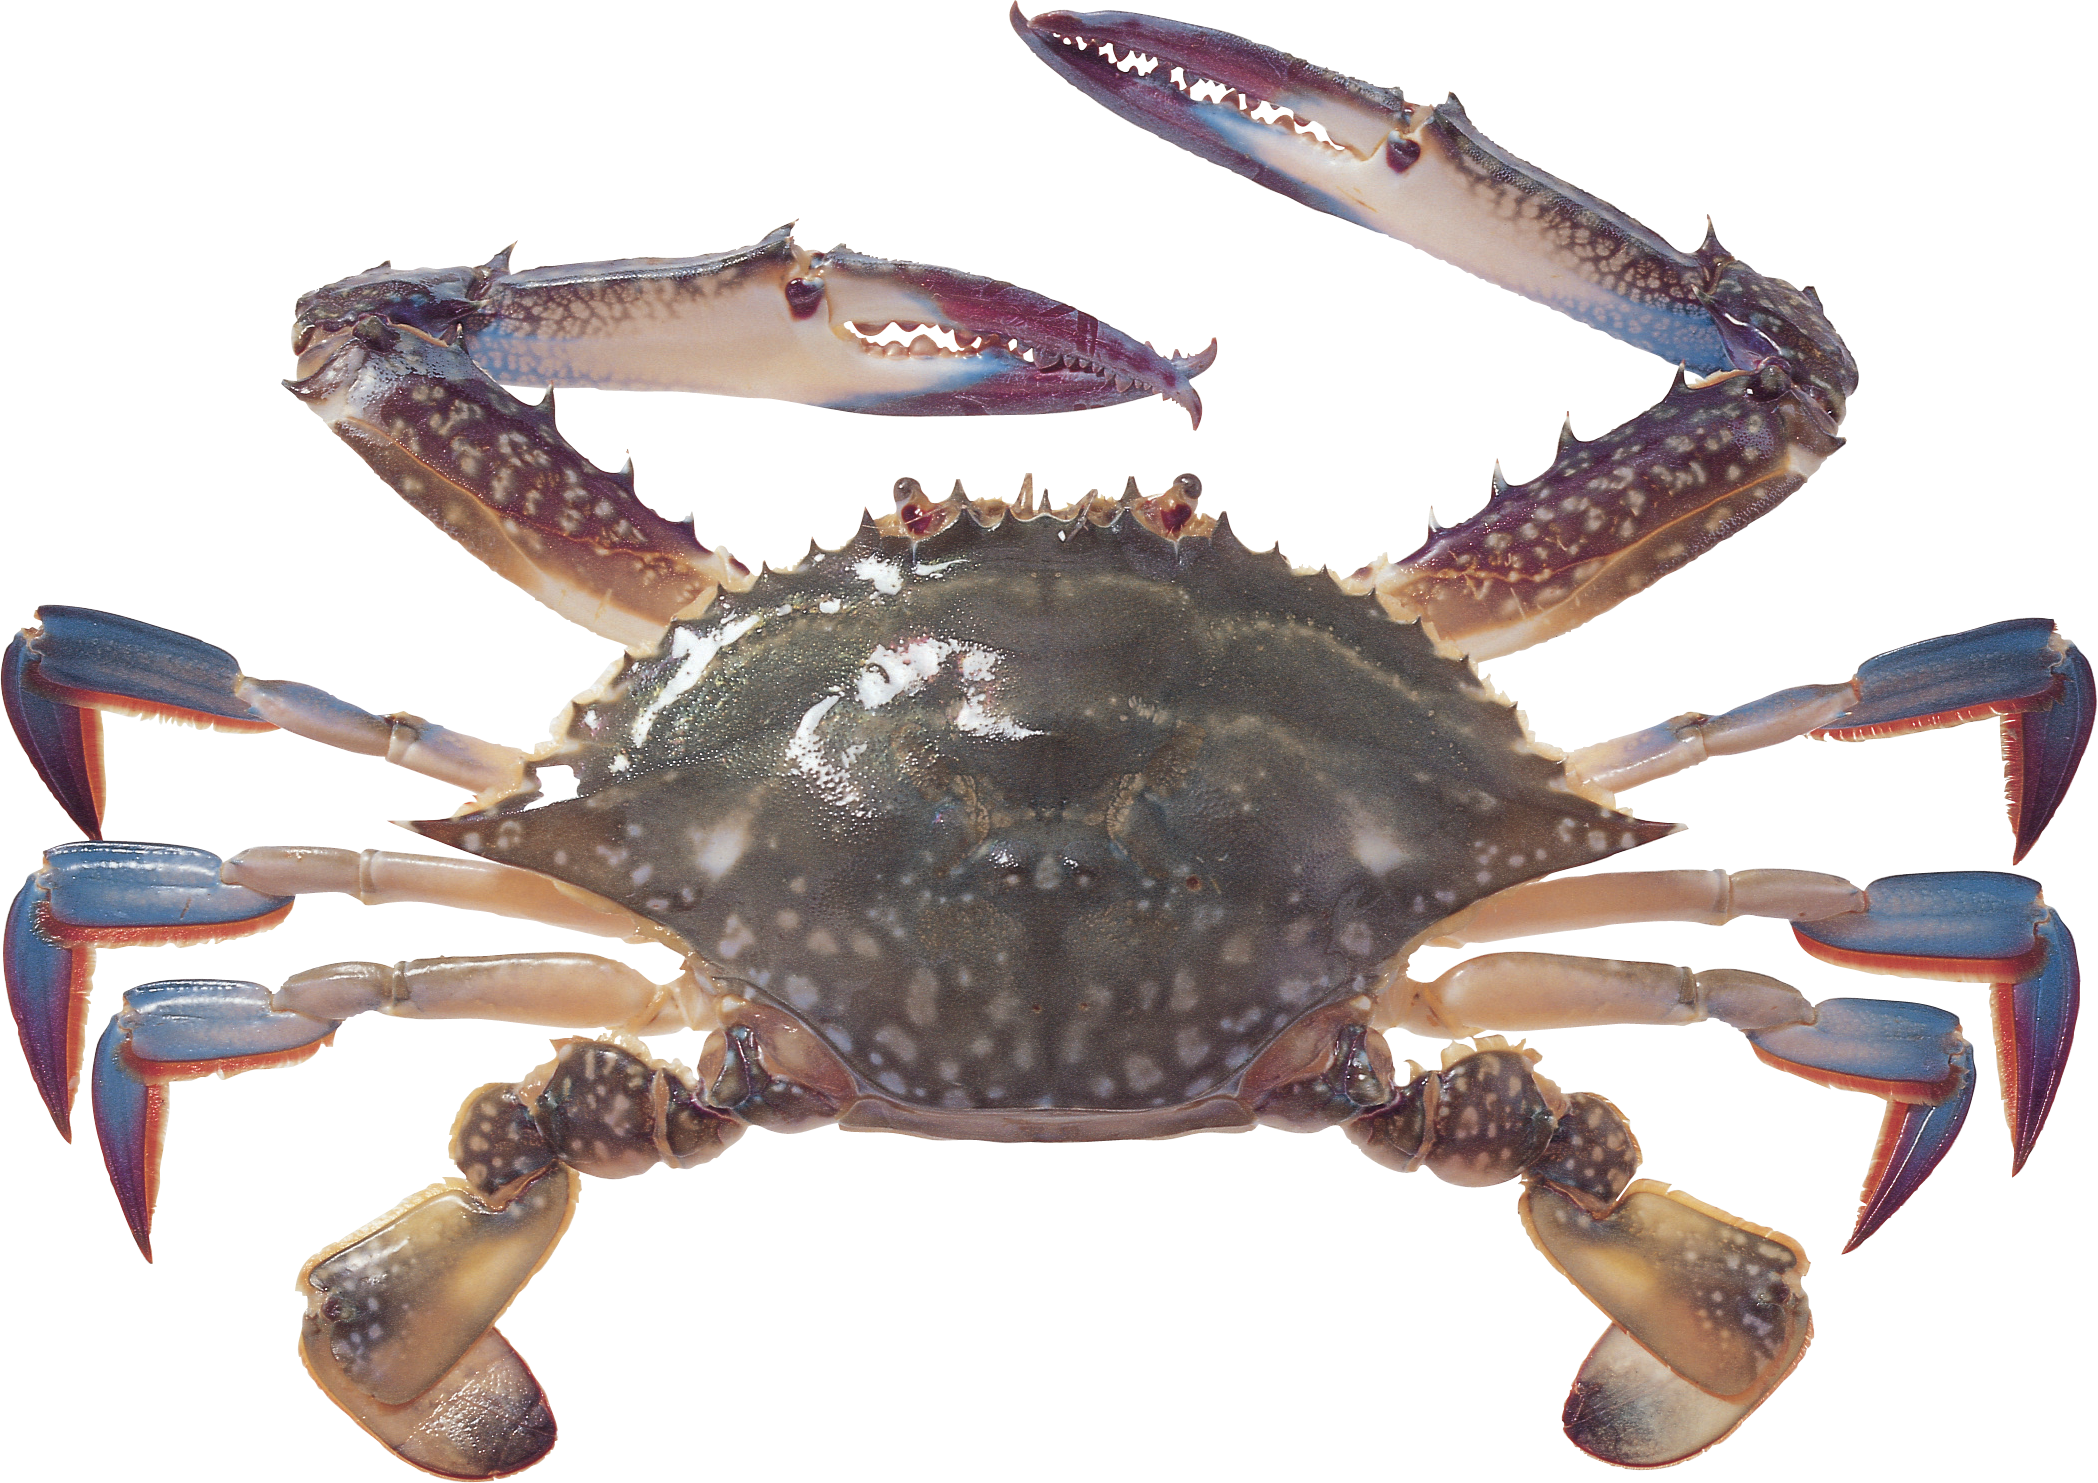 Collection Of Crab Image Png Hd Pluspng